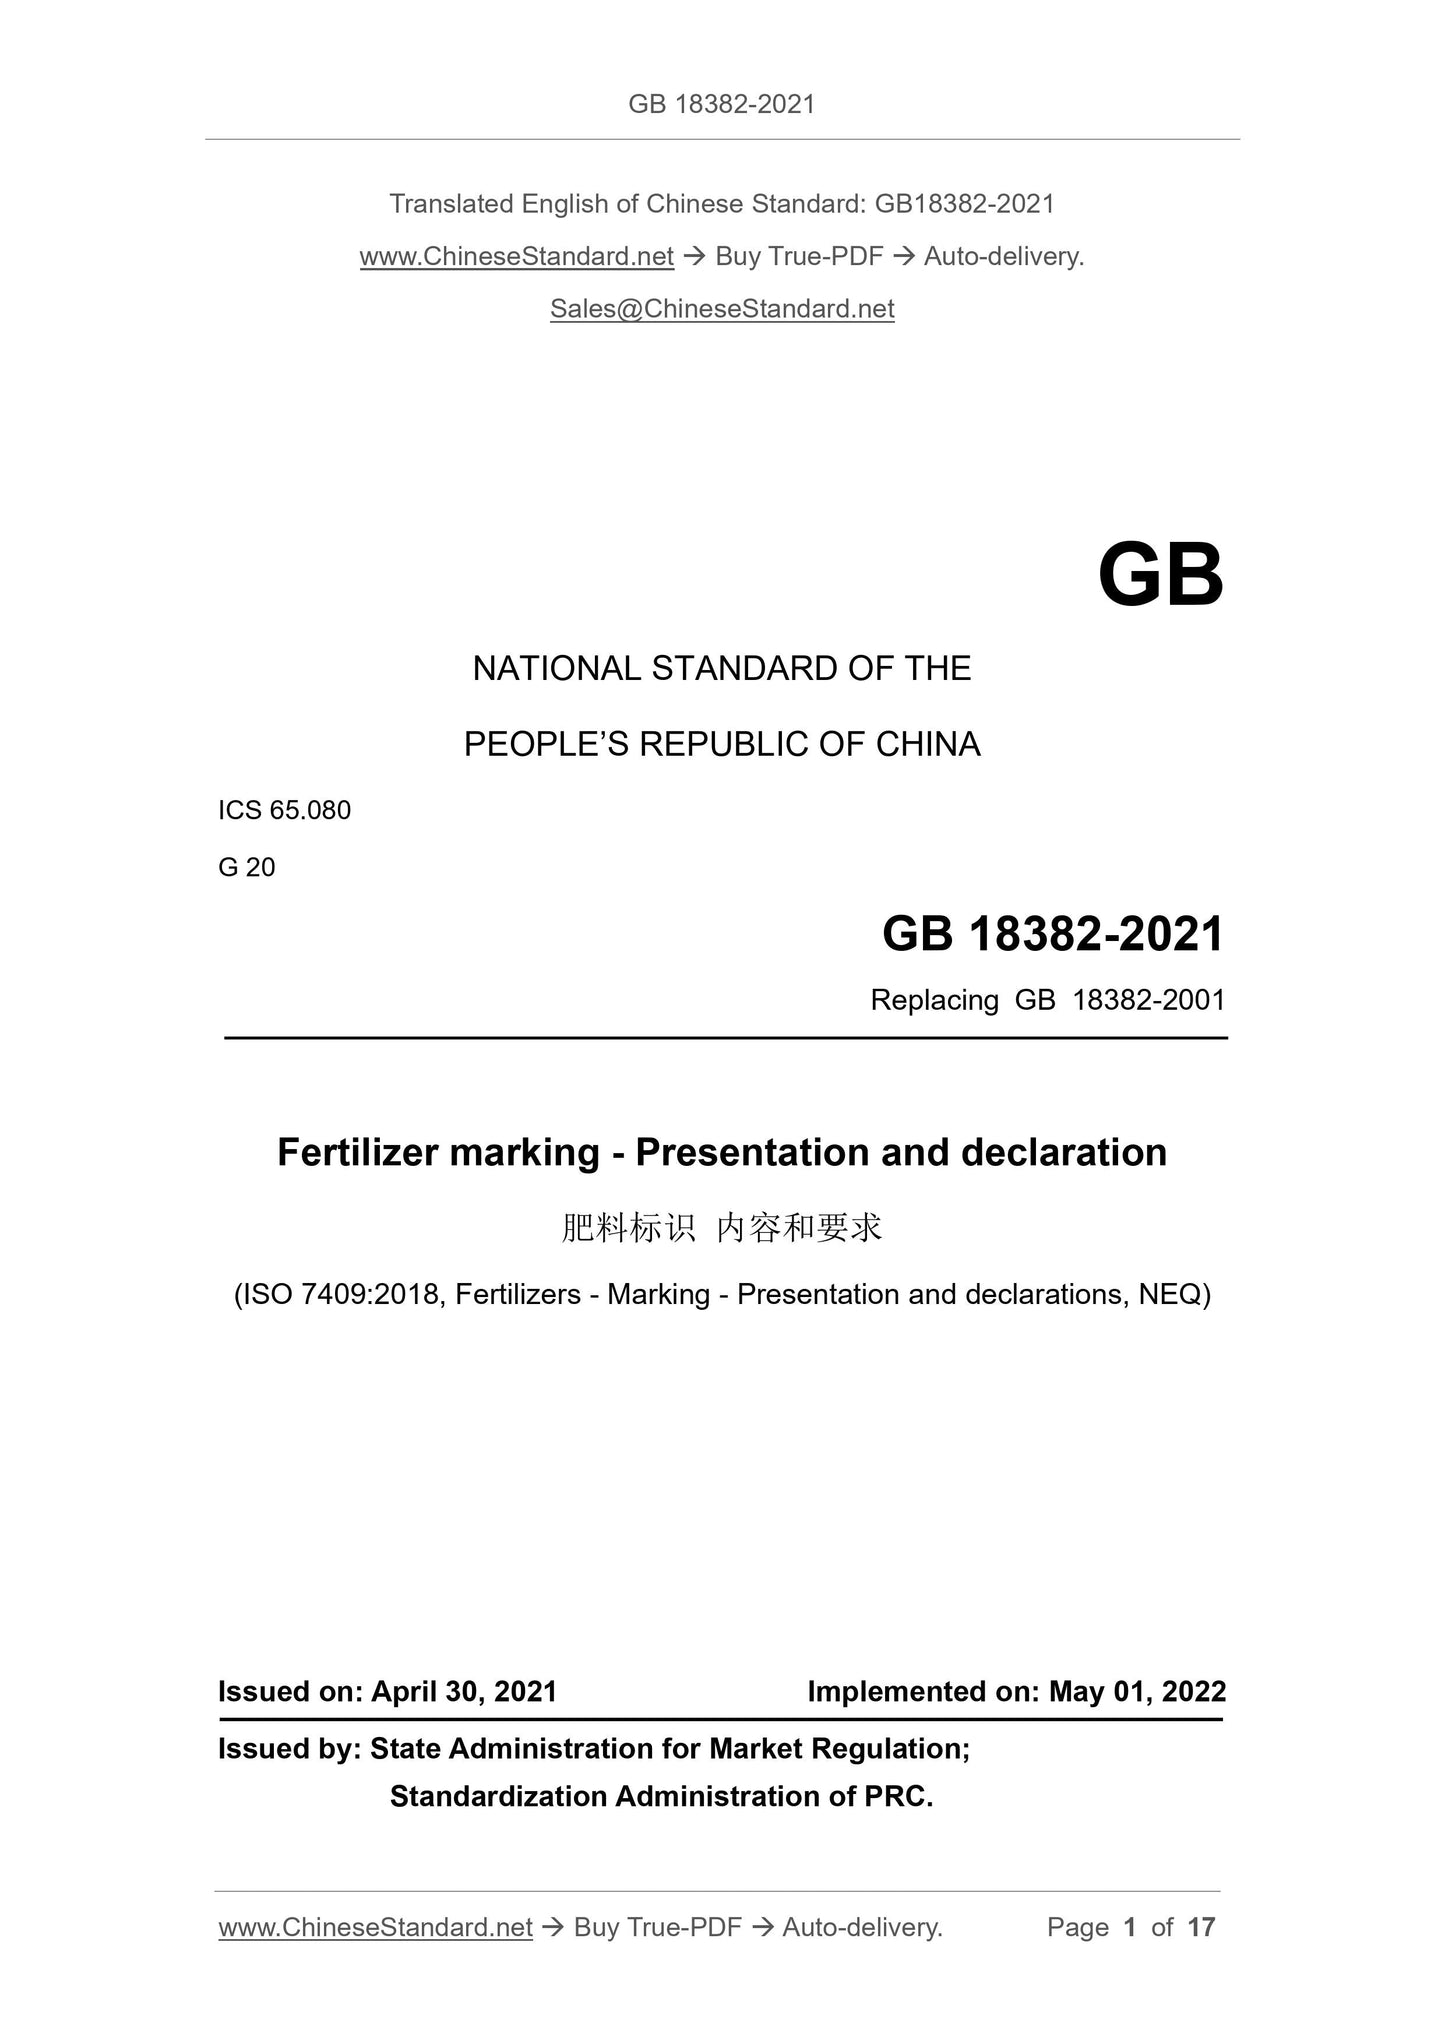 GB 18382-2021 Page 1